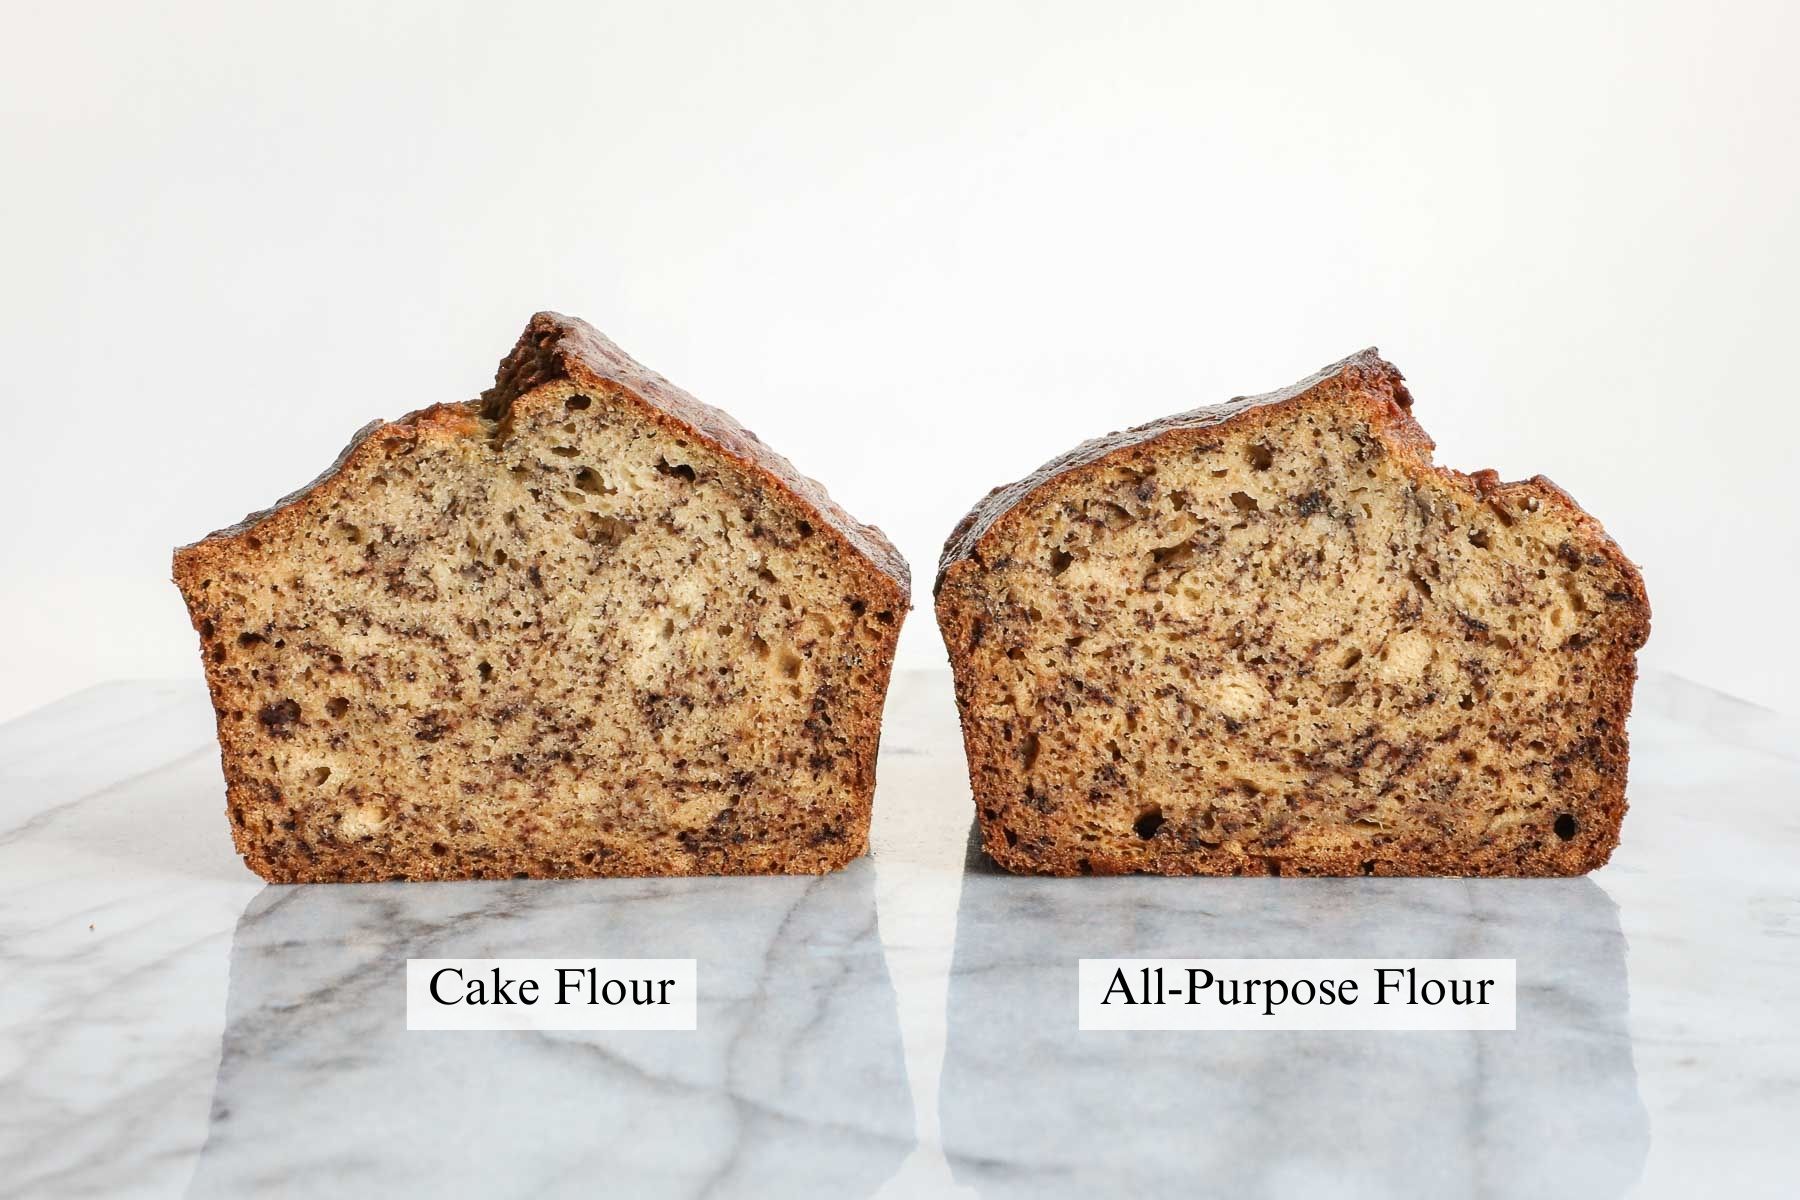 A comparison of two loaves of banana bread side by side, one made with cake flour, one made with all-purpose flour.